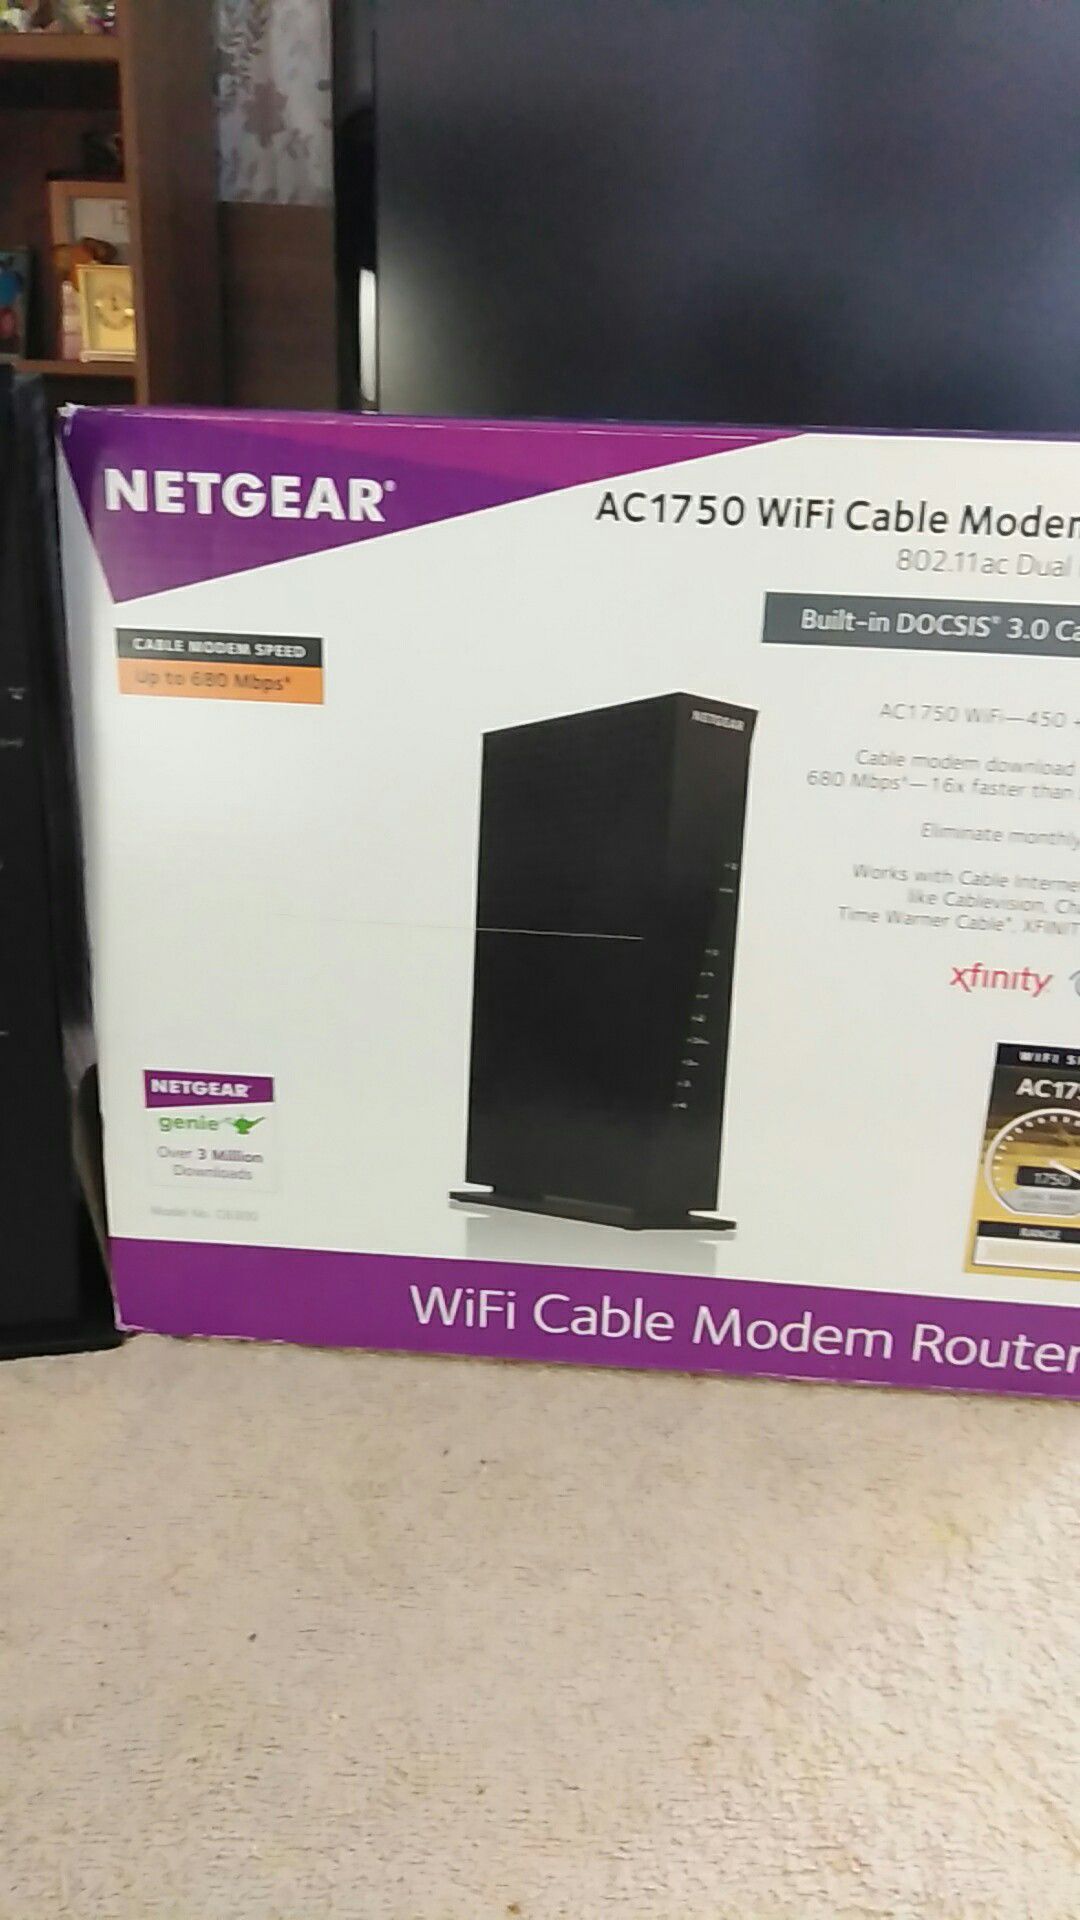 Ac1750 Wi-Fi cable modem router